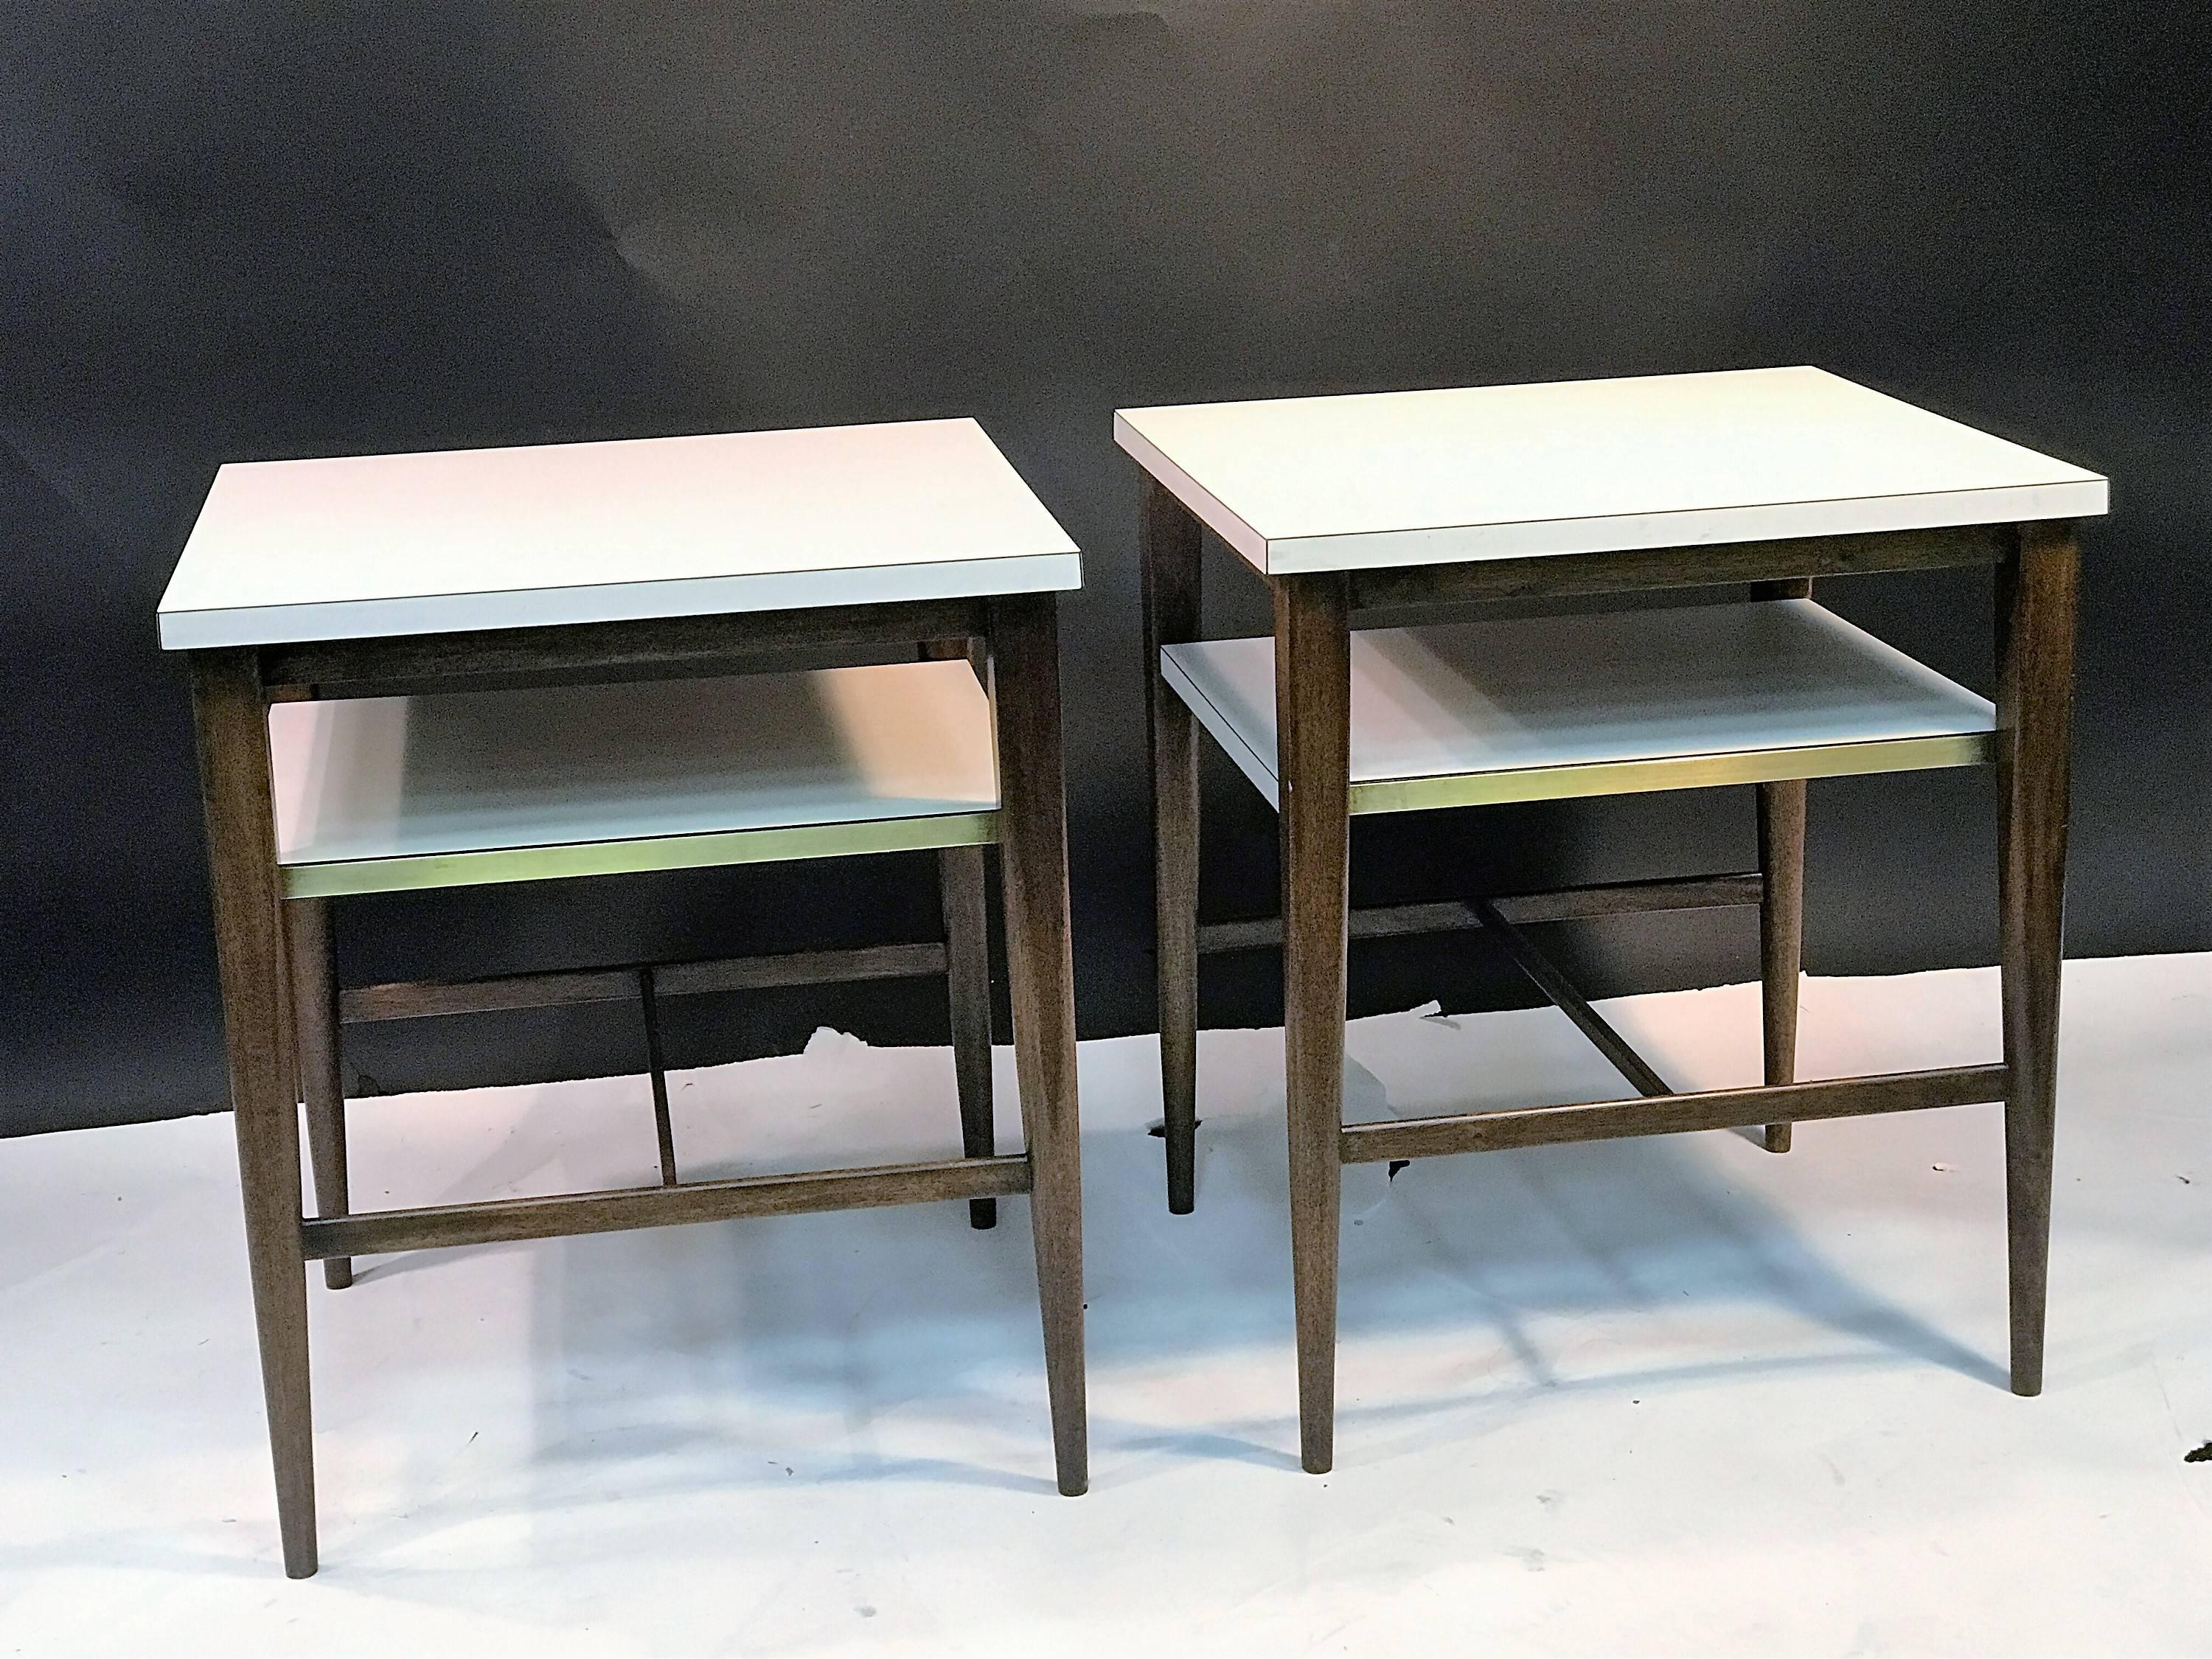 Fantastic high end pair of Paul McCobb double tier square top tables with a white laminate top and second laminate shelf that slides out on brass runners to accommodate cocktails, reading material etc. Beautiful walnut legs and stretchers complete